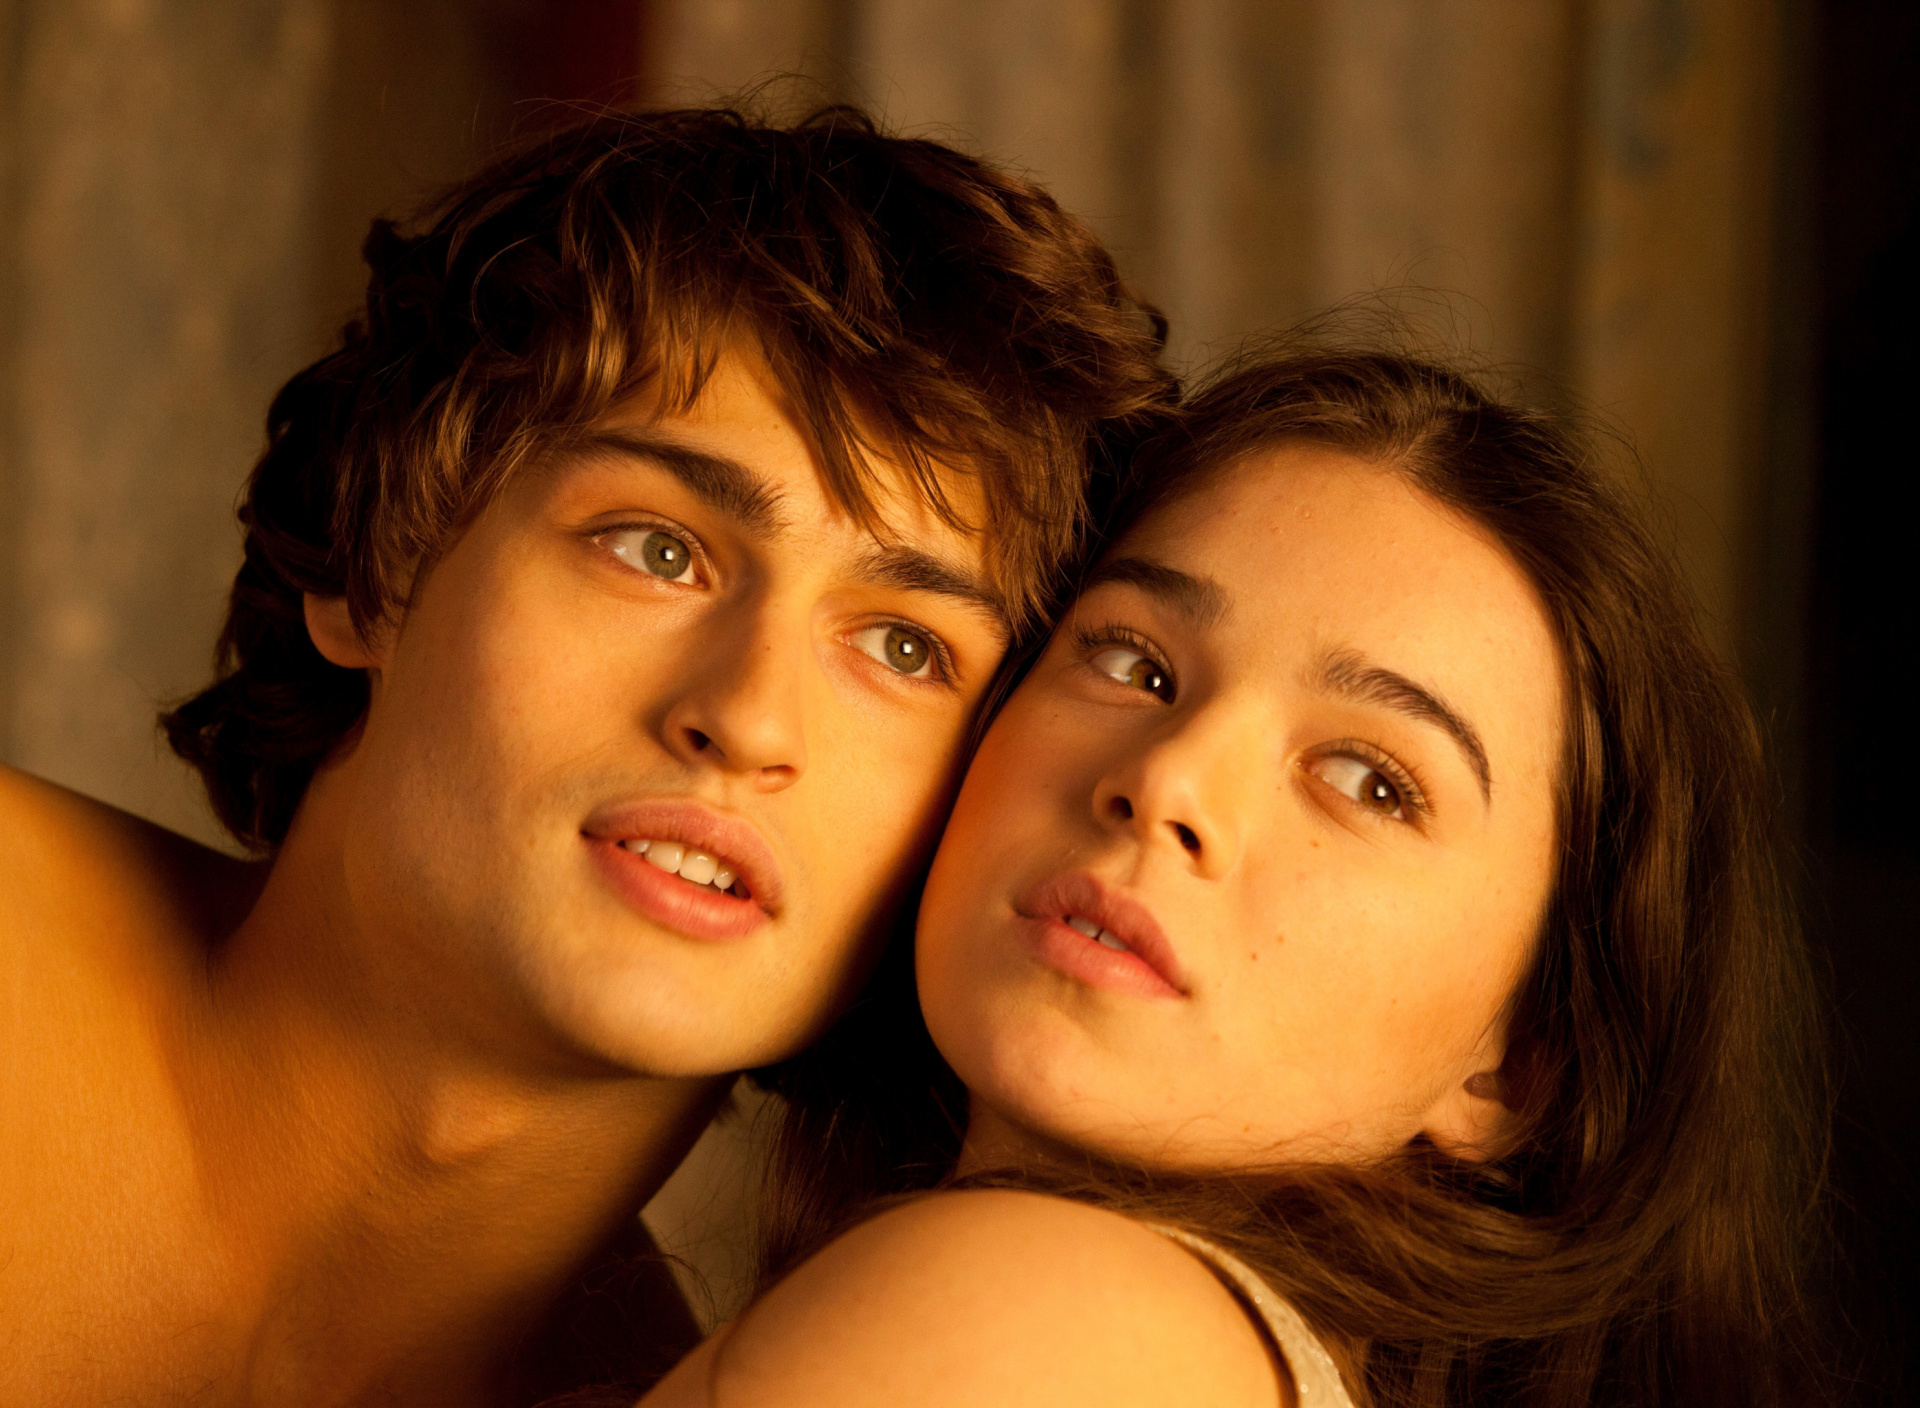 Romeo and Juliet with Hailee Steinfeld and Douglas Booth screenshot #1 1920x1408